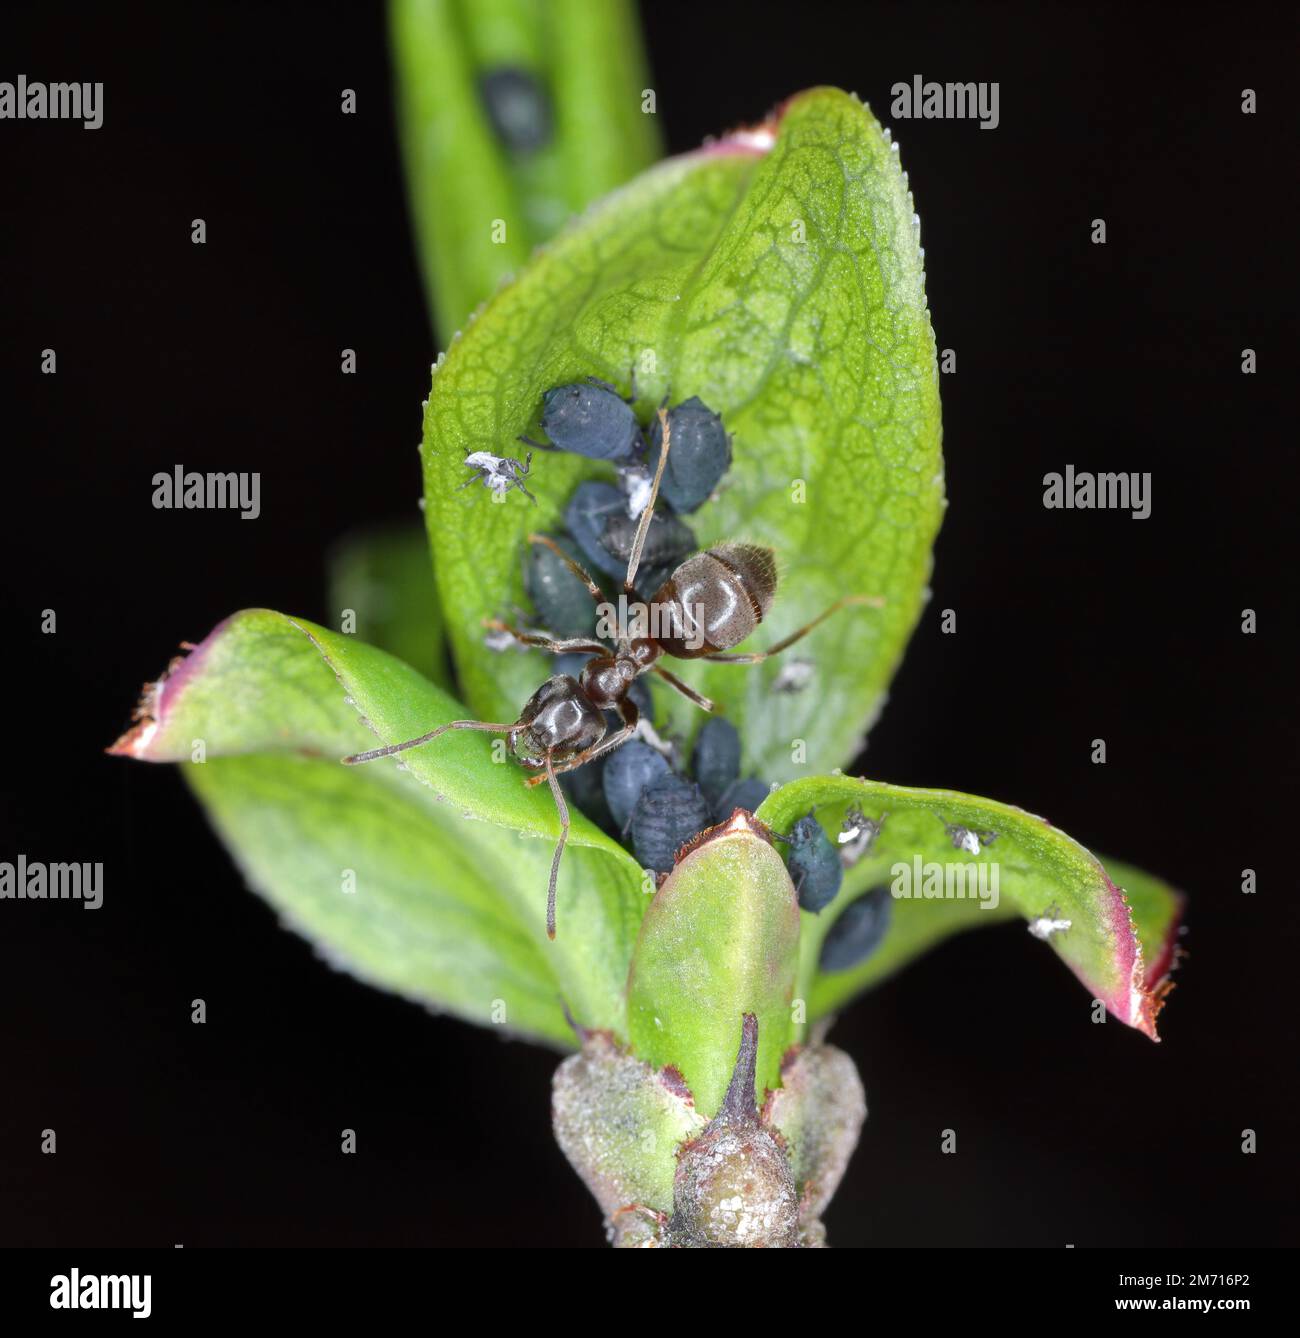 Lasius niger, the black garden ant, and aphids. The ant is milking the aphids. Black bean aphid, Aphis fabae on Euonymus europaeus, the spindle, Europ Stock Photo